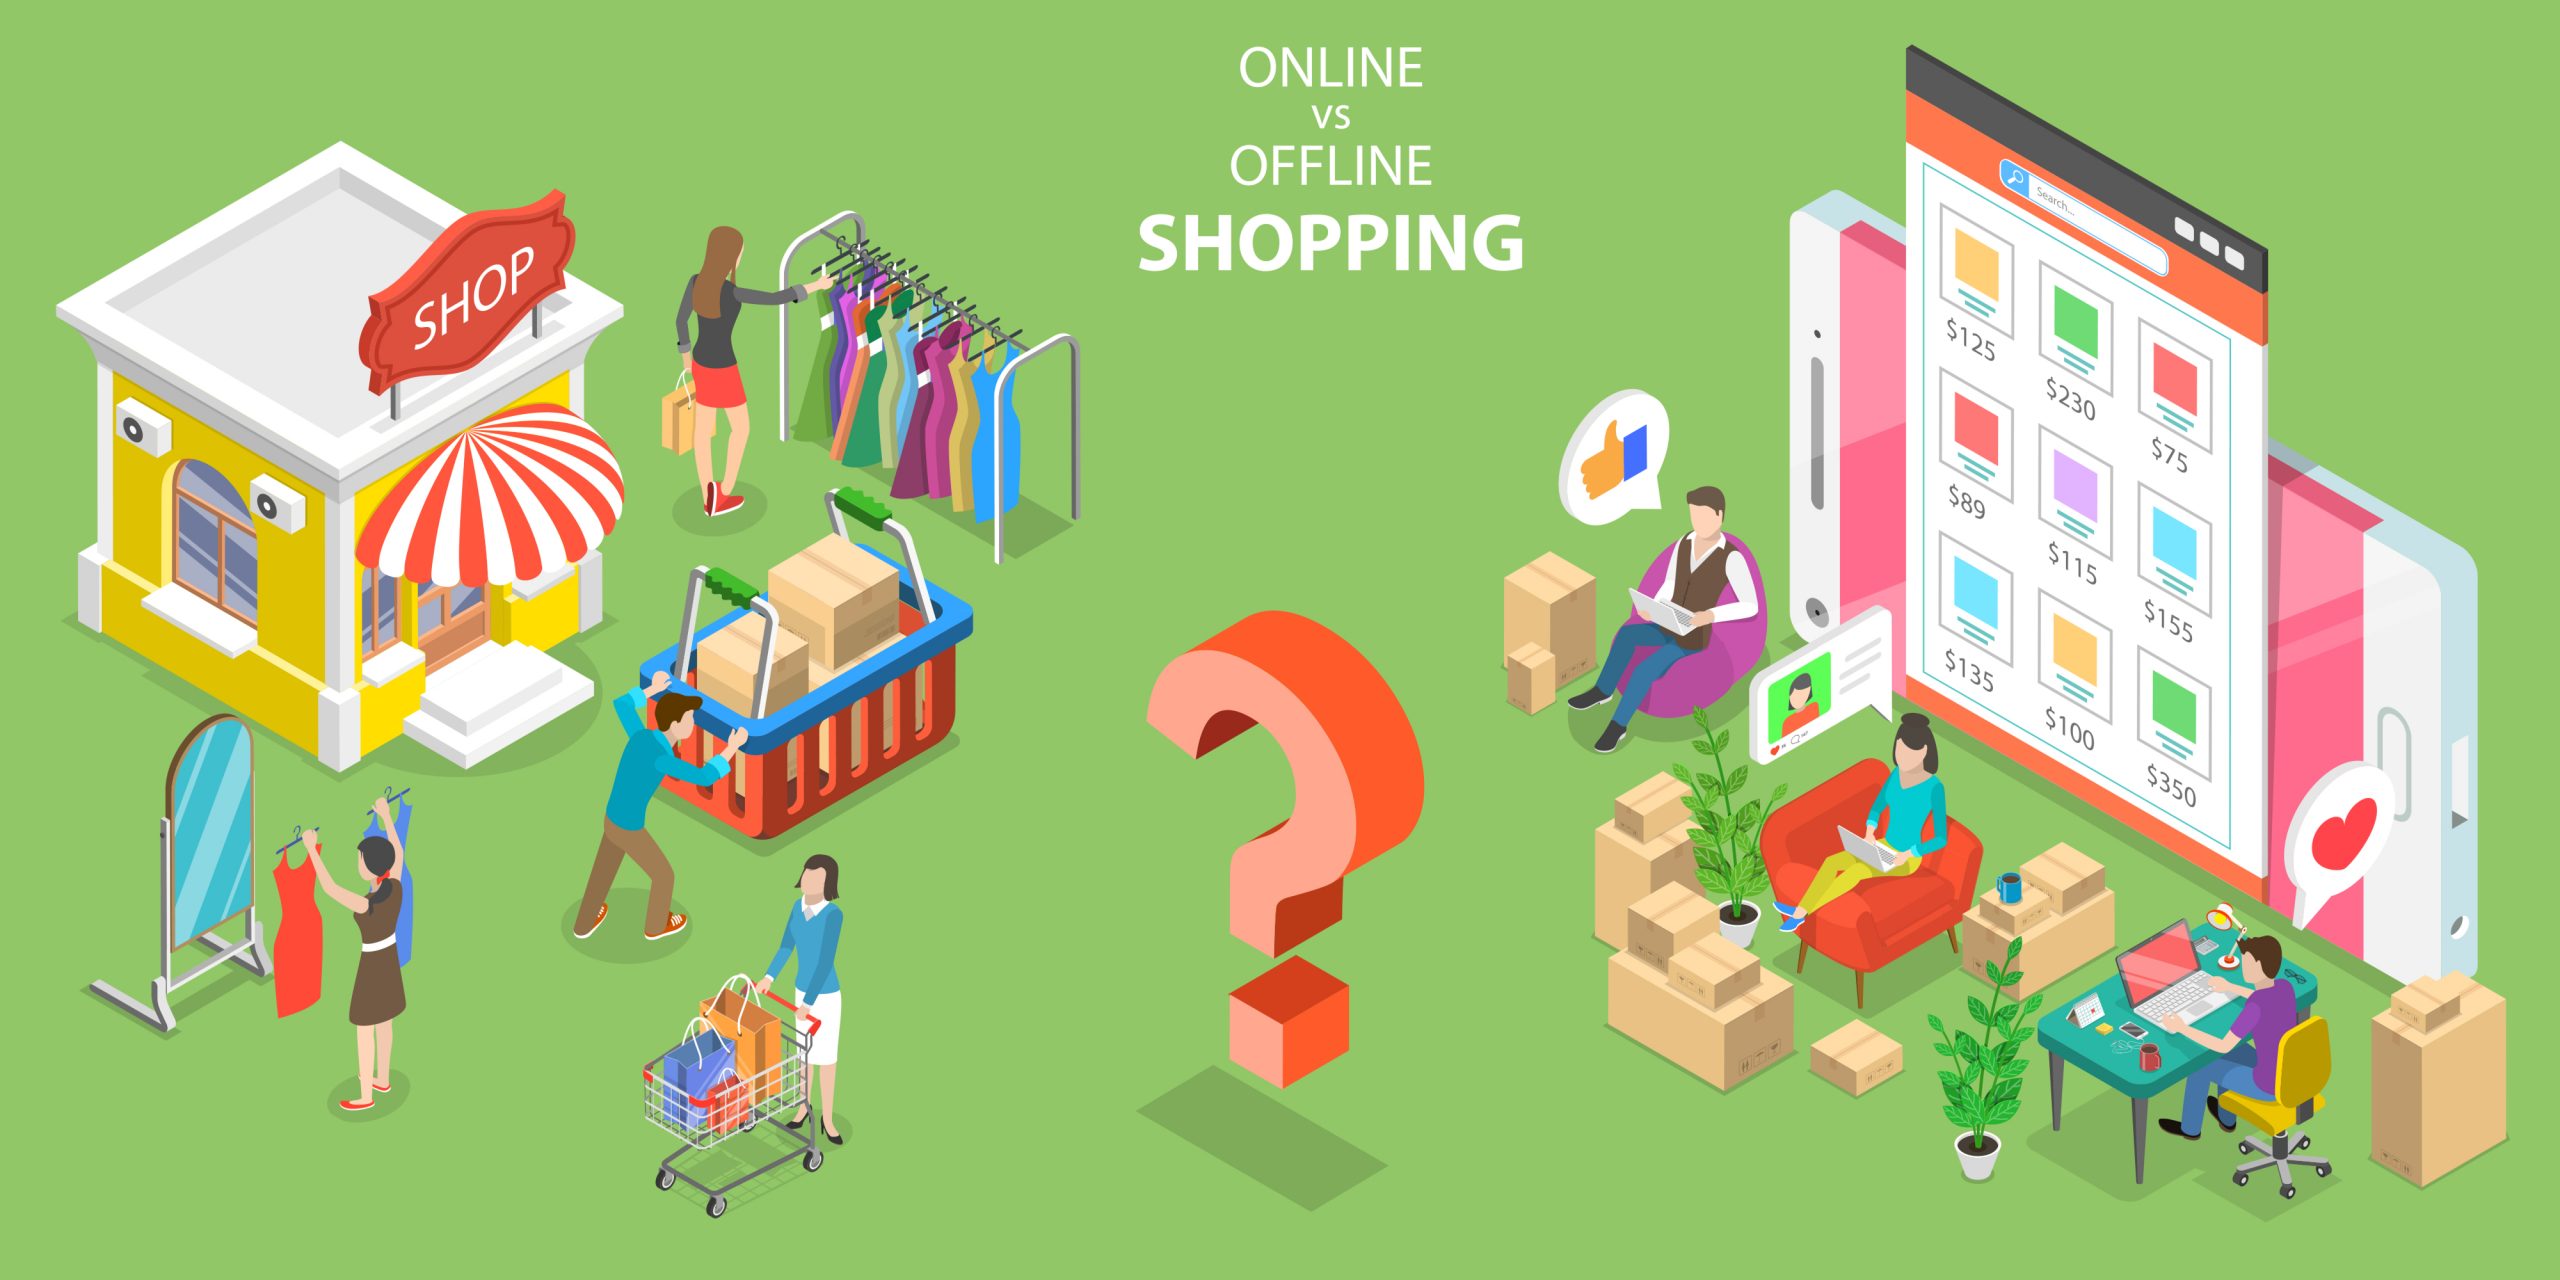 Physical stores vs online shopping. What are the pros and cons?